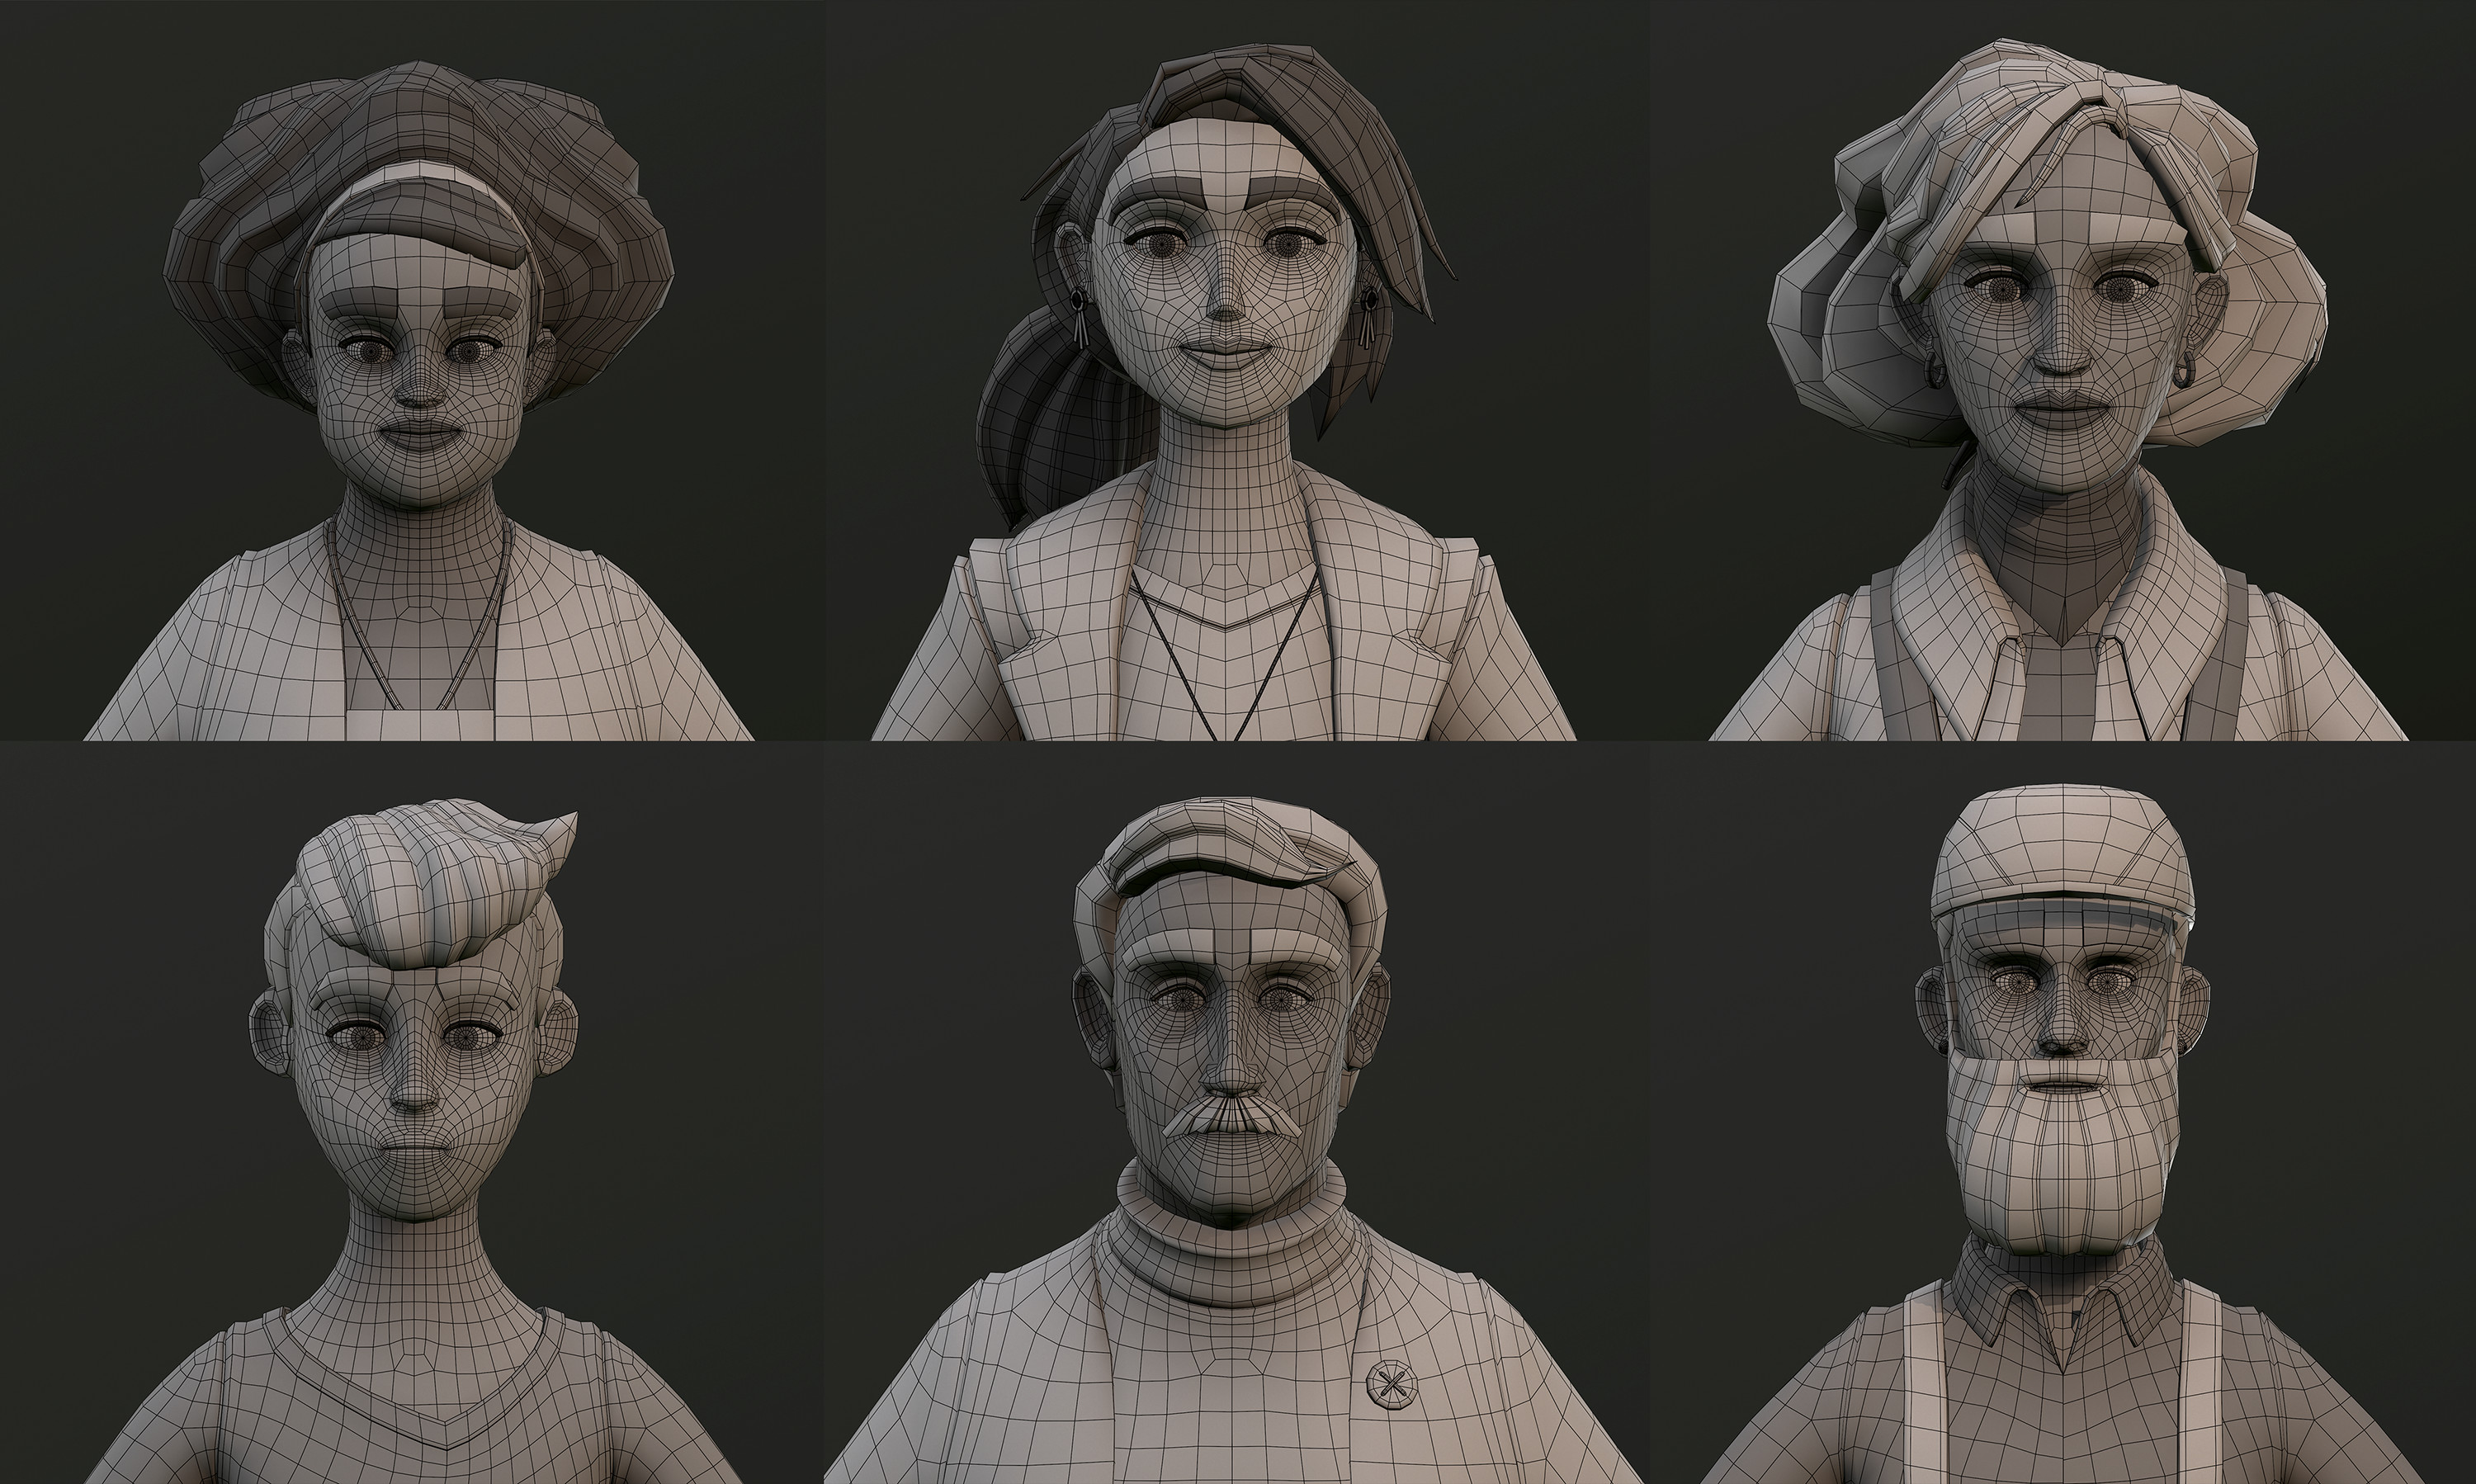 Wireframe of character heads.